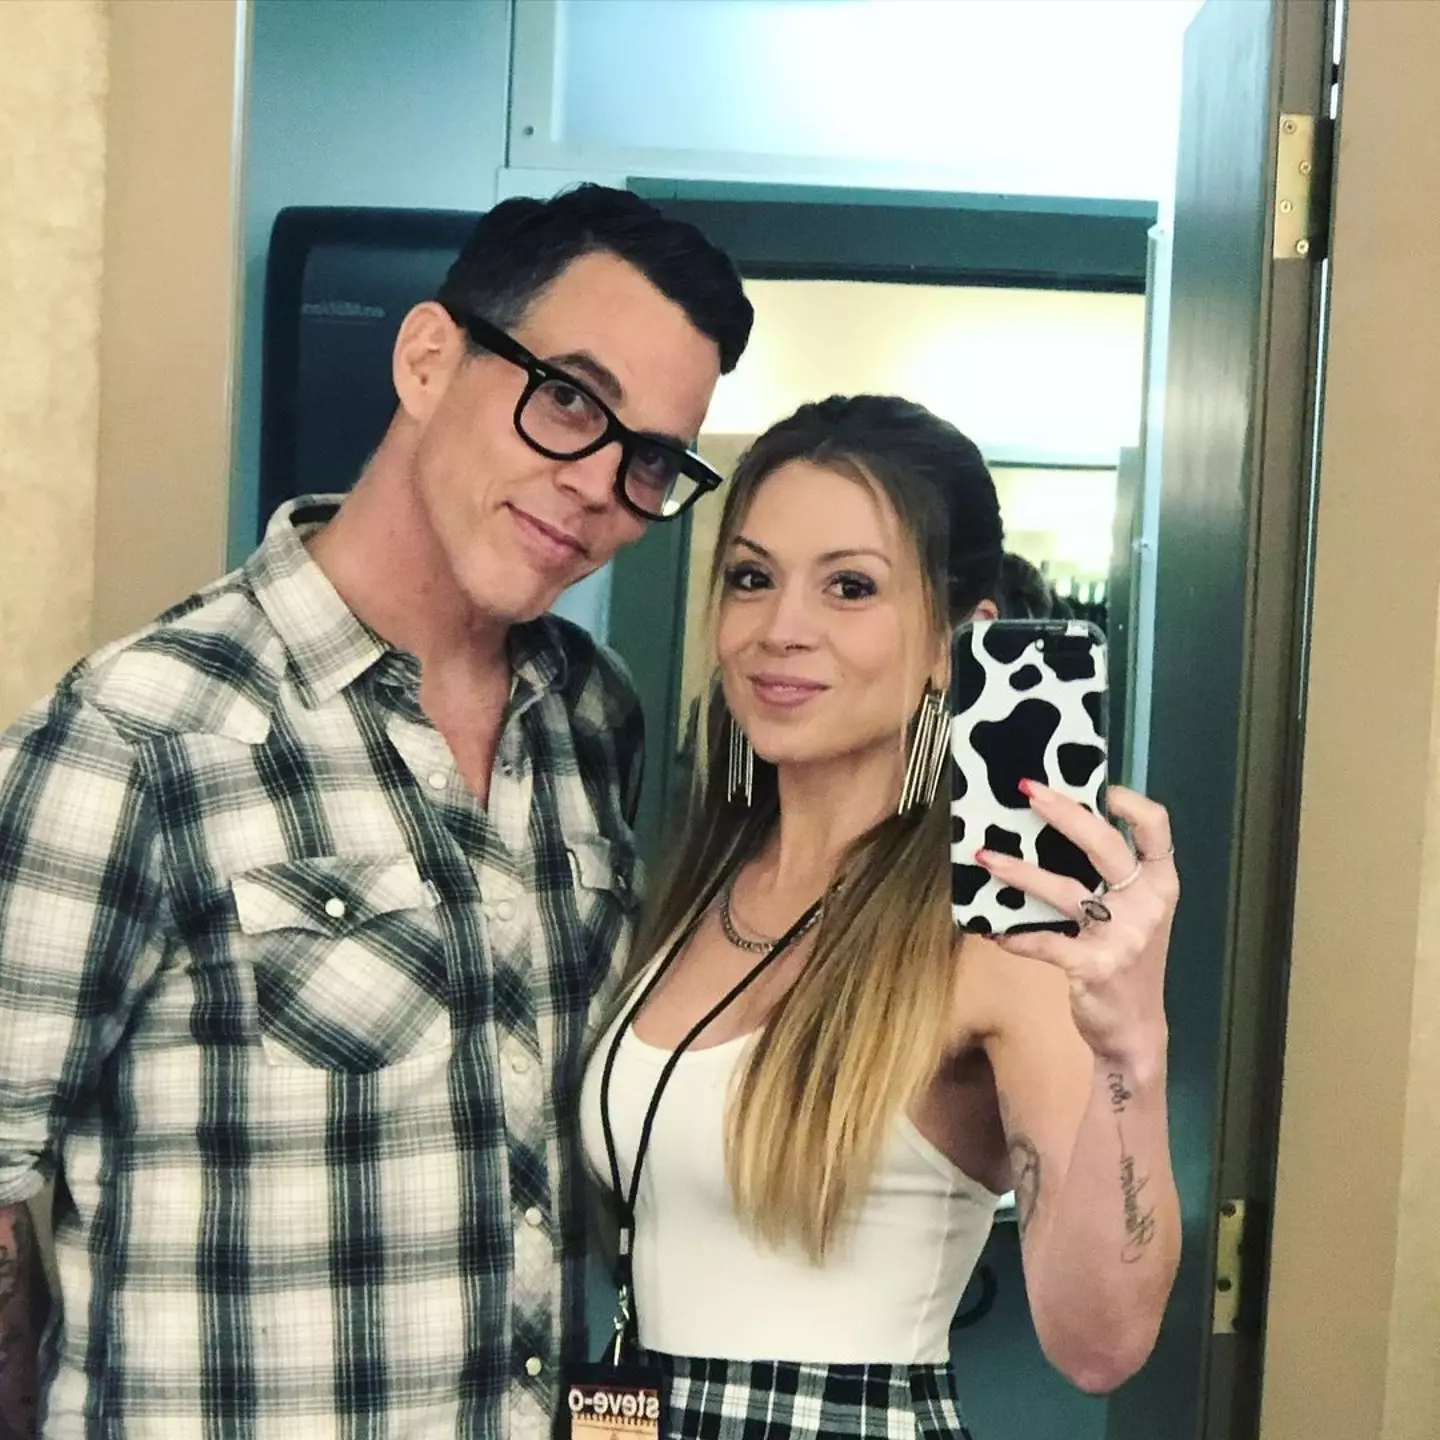 Steve-O with his fiancée Lux Wright.